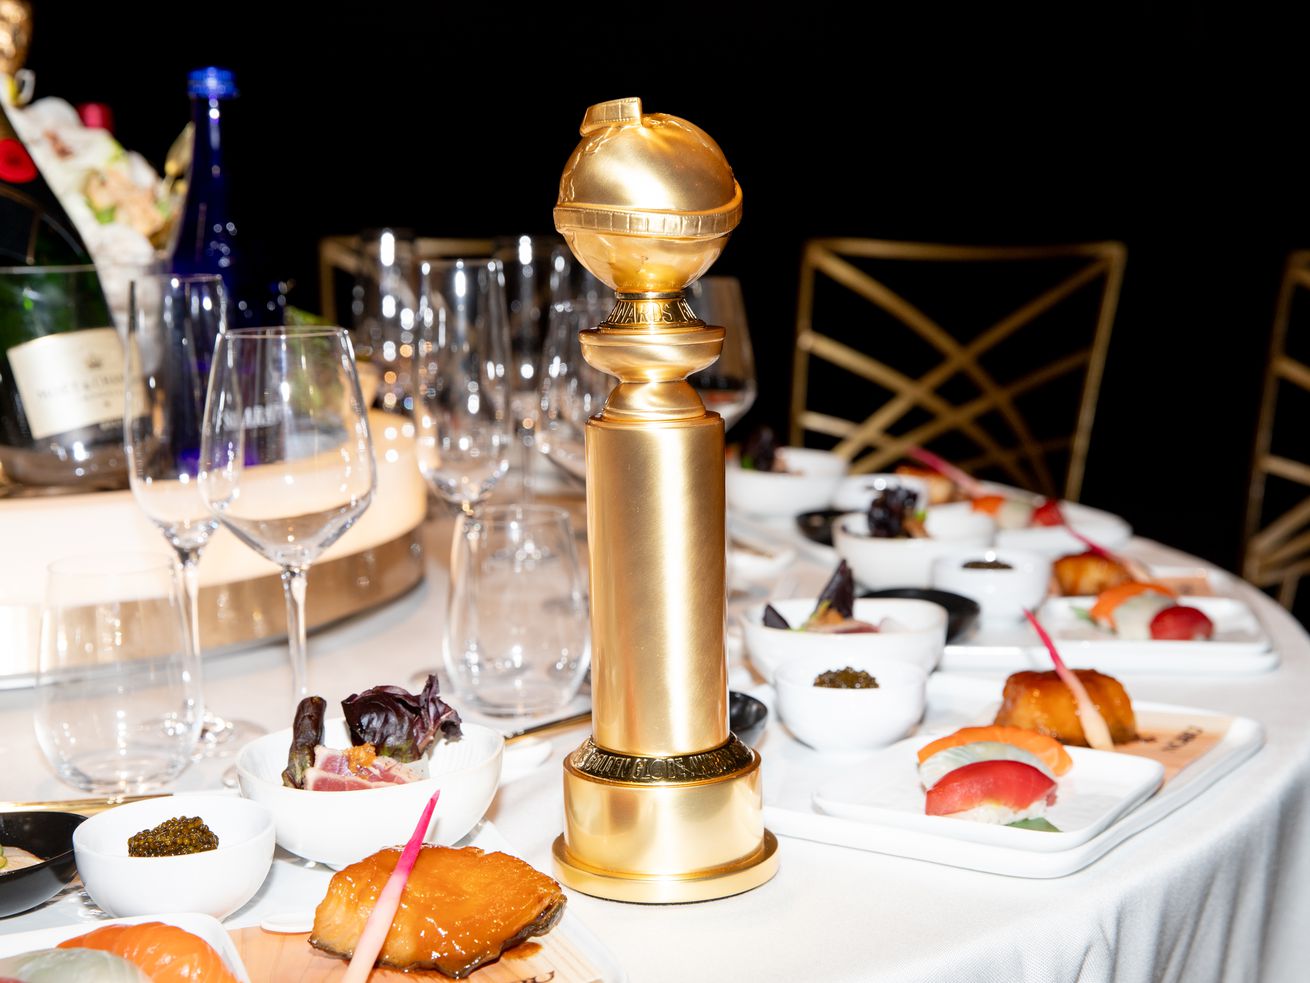 A Golden Globe statue standing on a dining table with a white tablecloth, dishes of food, and a bottle of champagne.